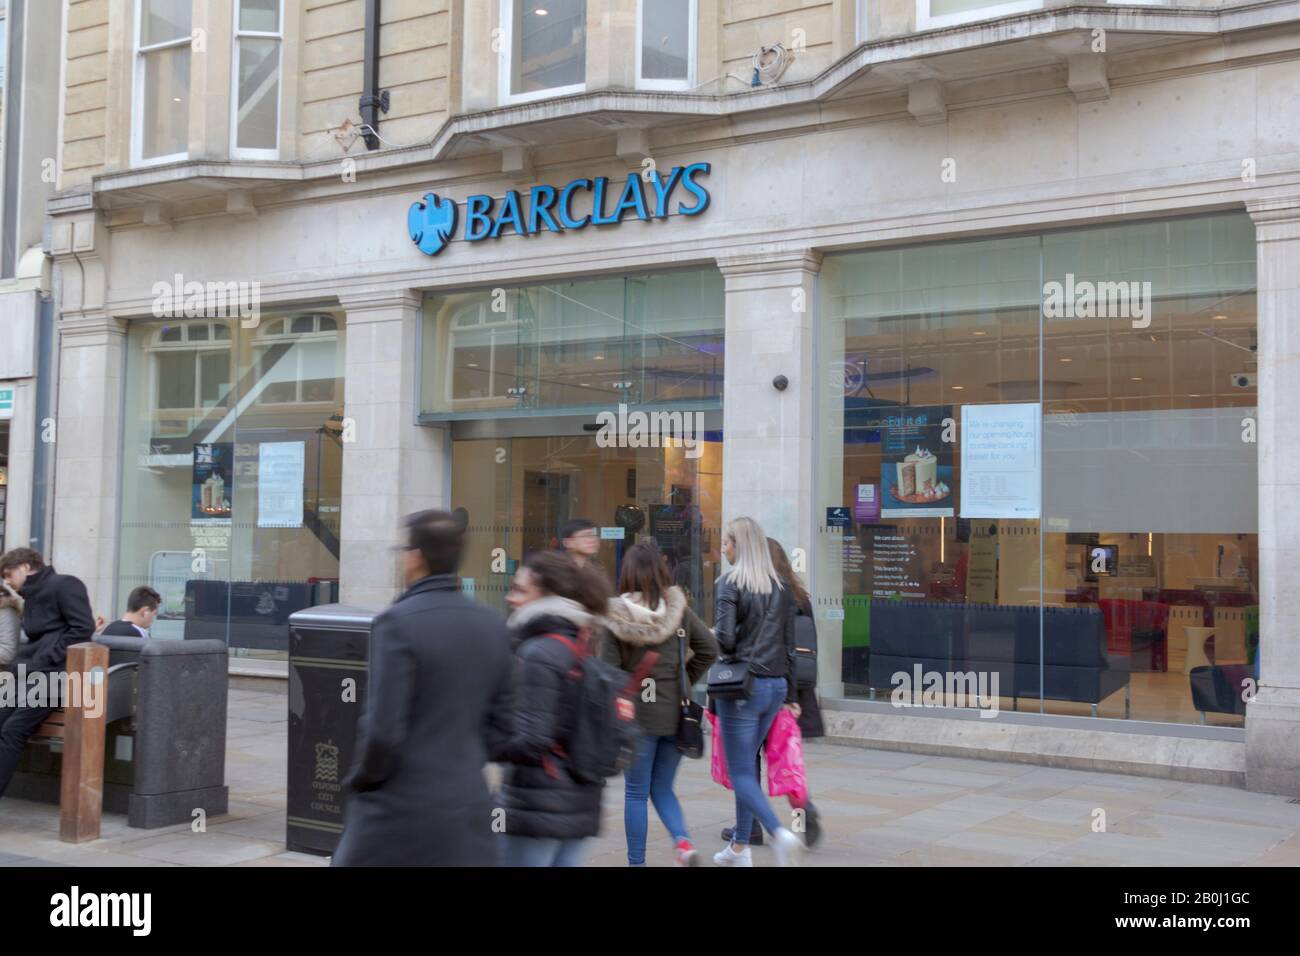 Oxford, Oxfordshire, UK. 23rd March 2019. UK Shopping. Shoppers and Tourists at Barclays Bank in picturesque Oxford. Stock Photo